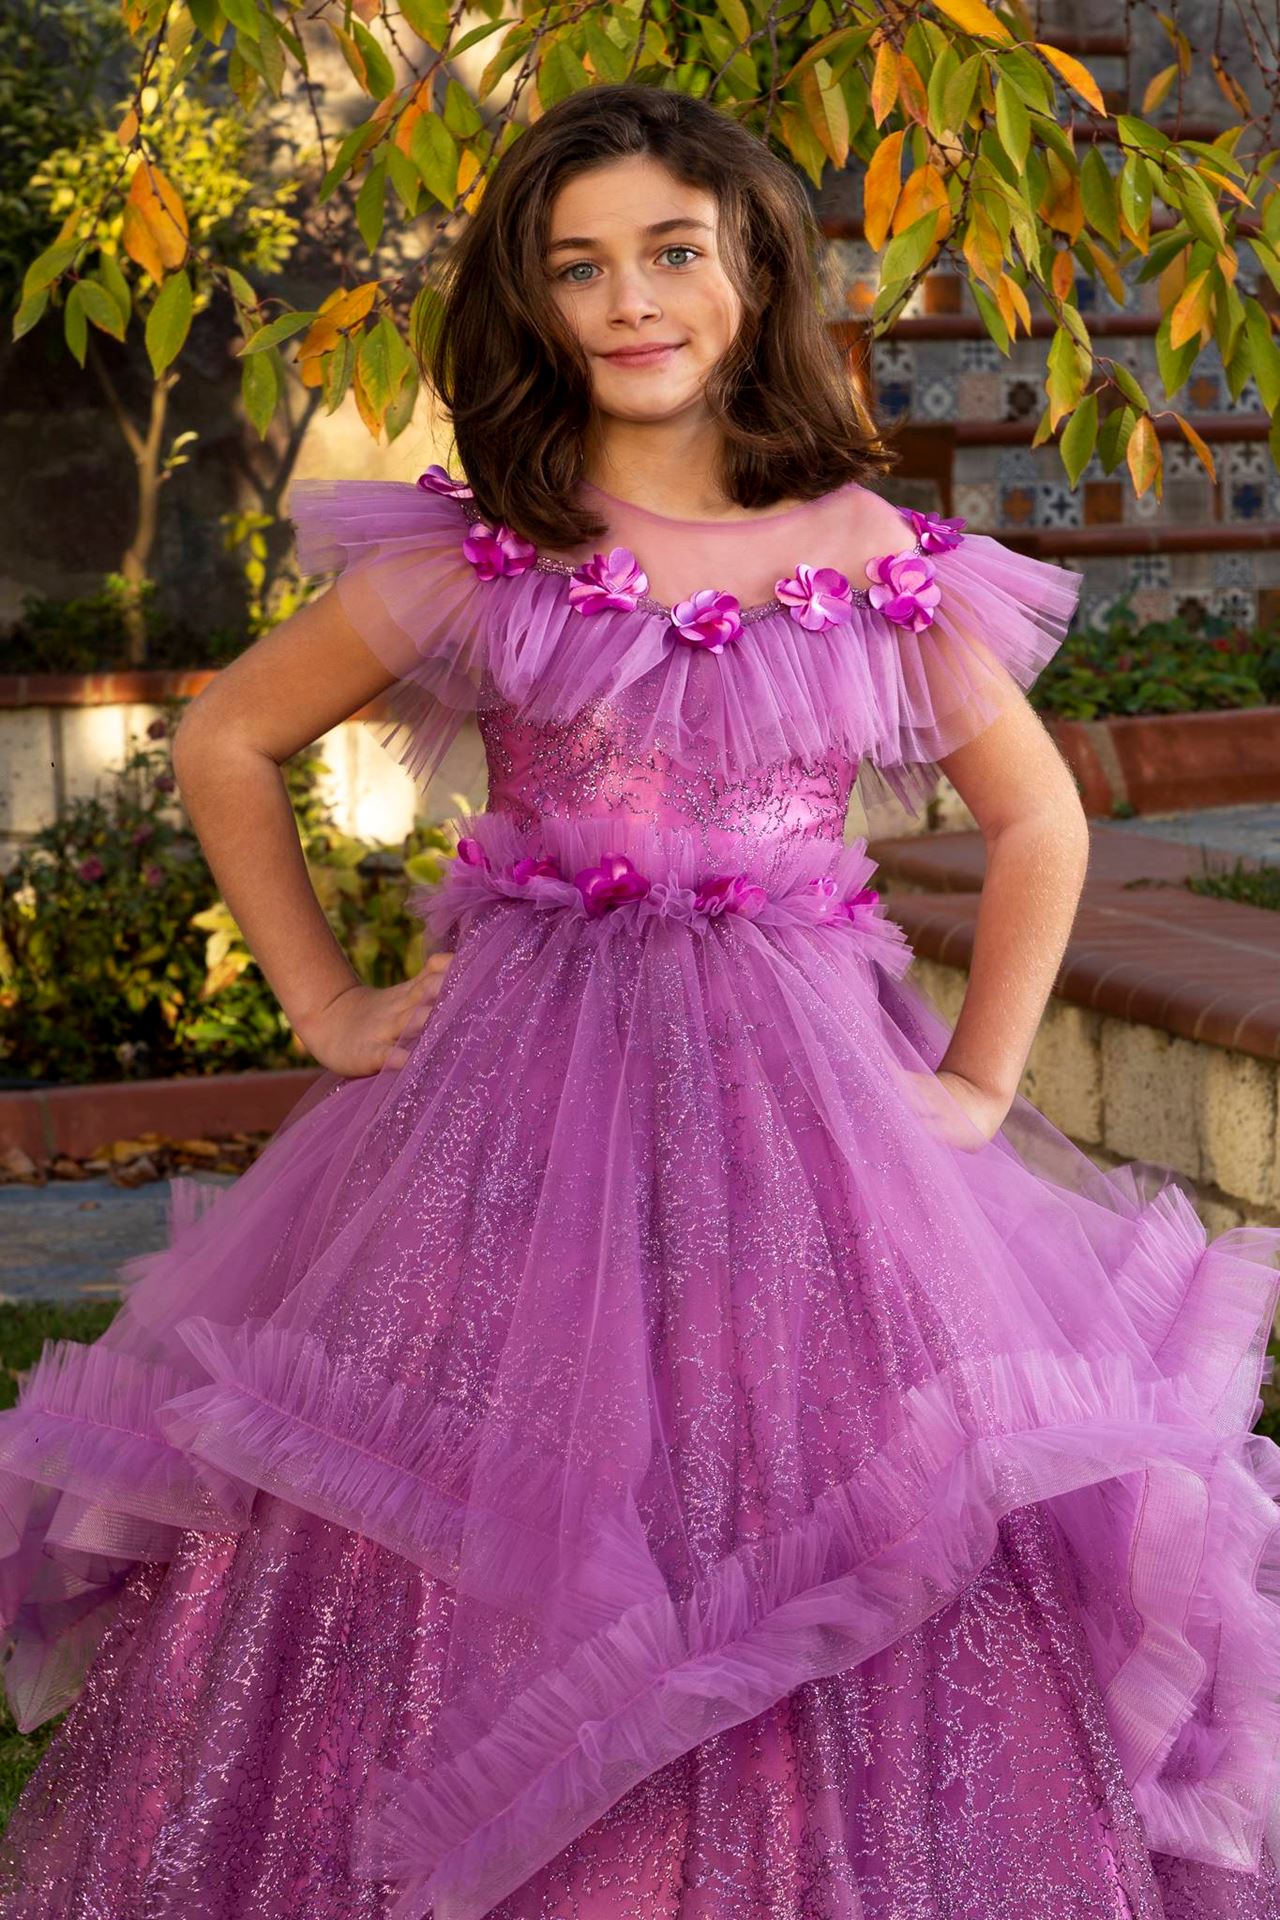 Dazzle 7-11 Years Old Girl Dress 30079 Lilac